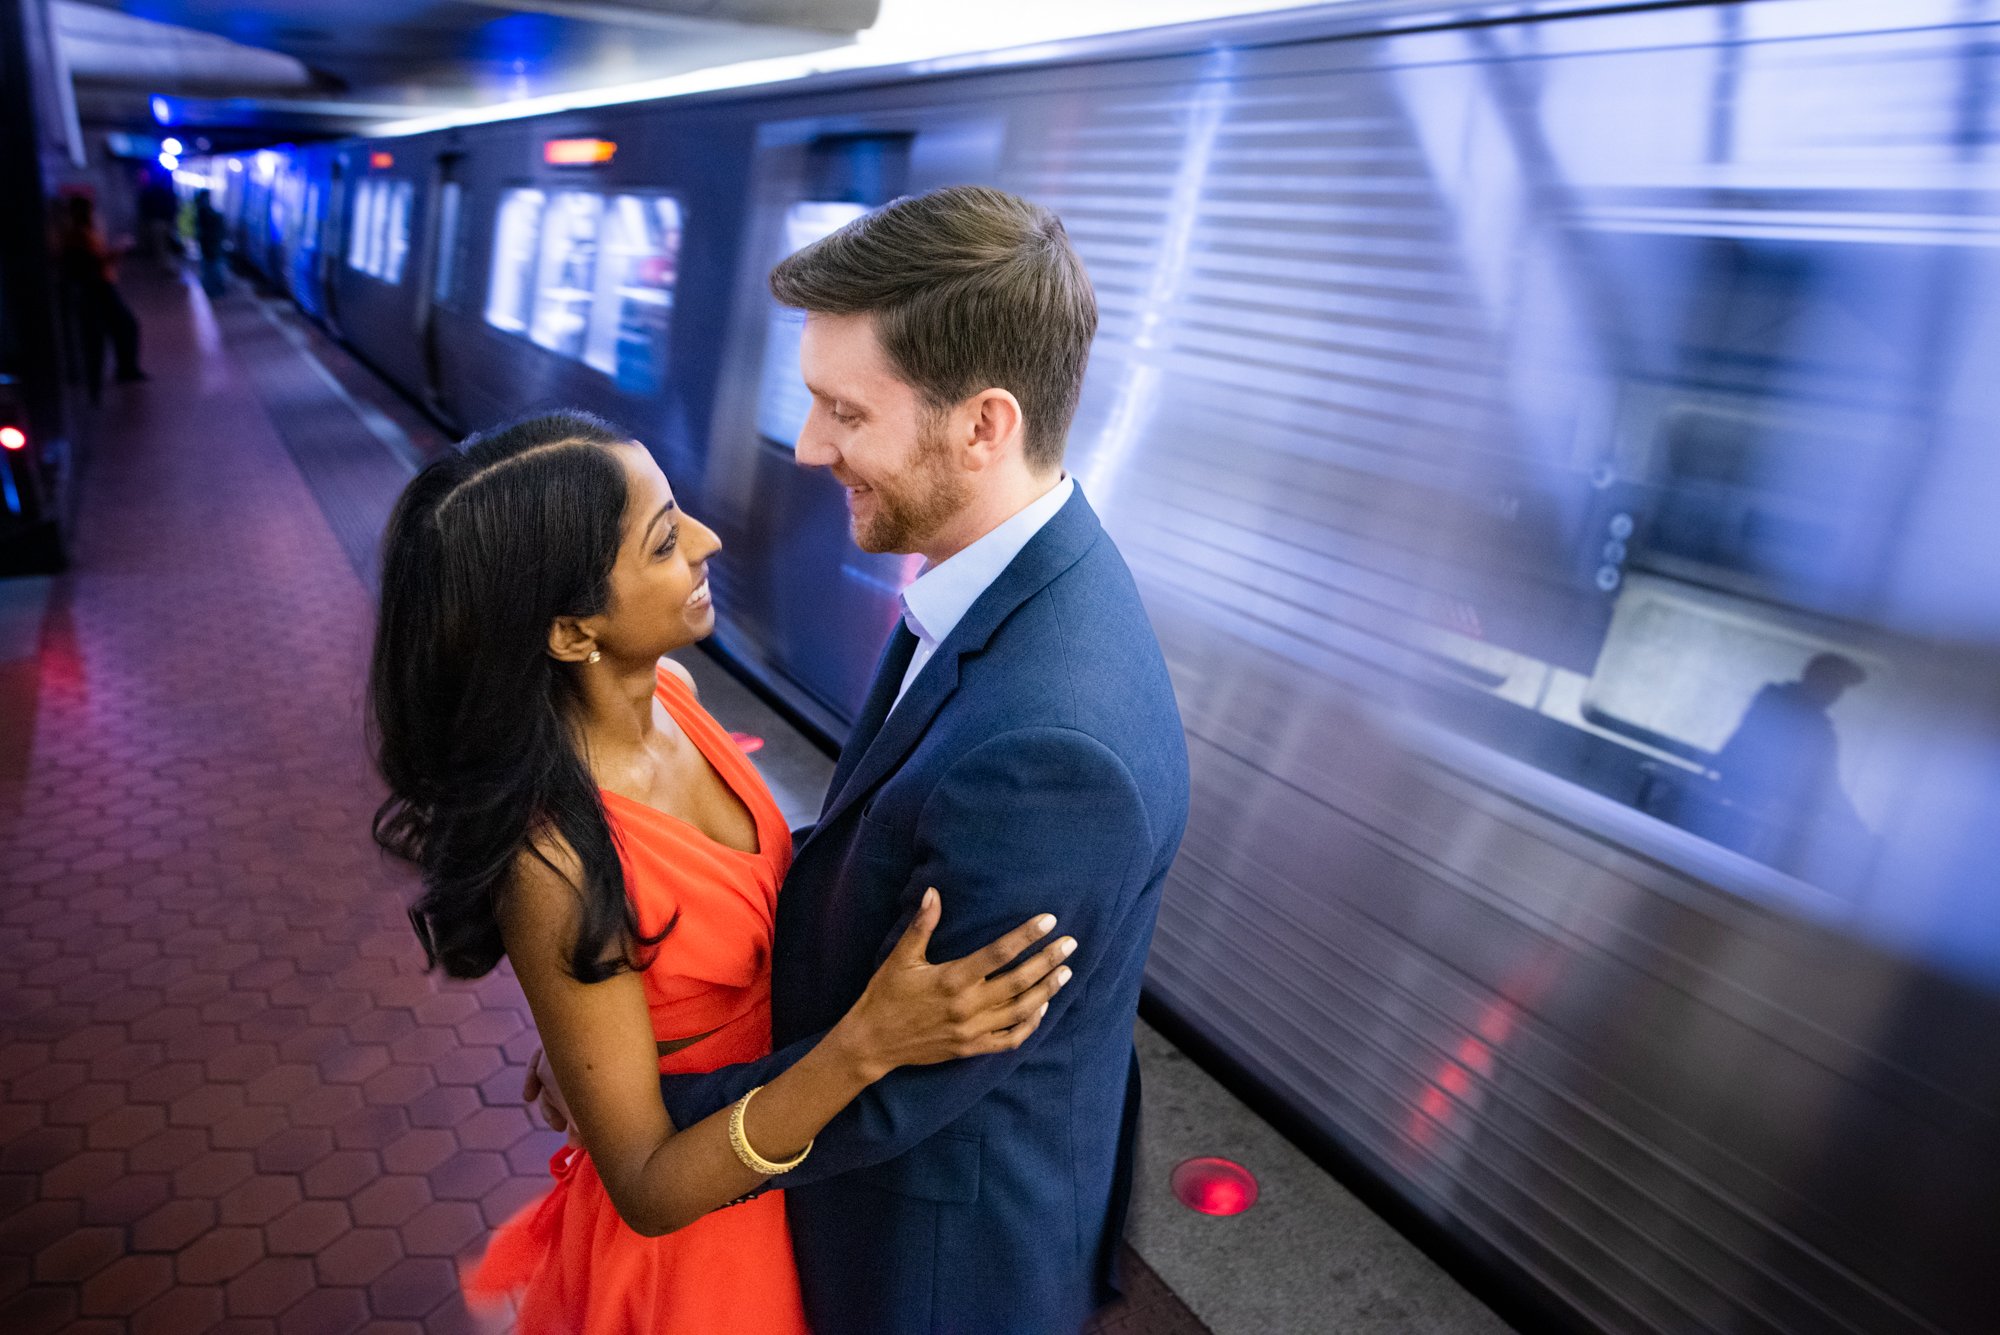 Engagement session  at the metro in Washington D.C. The best engagement photographer Mantas Kubilinskas-2.jpg